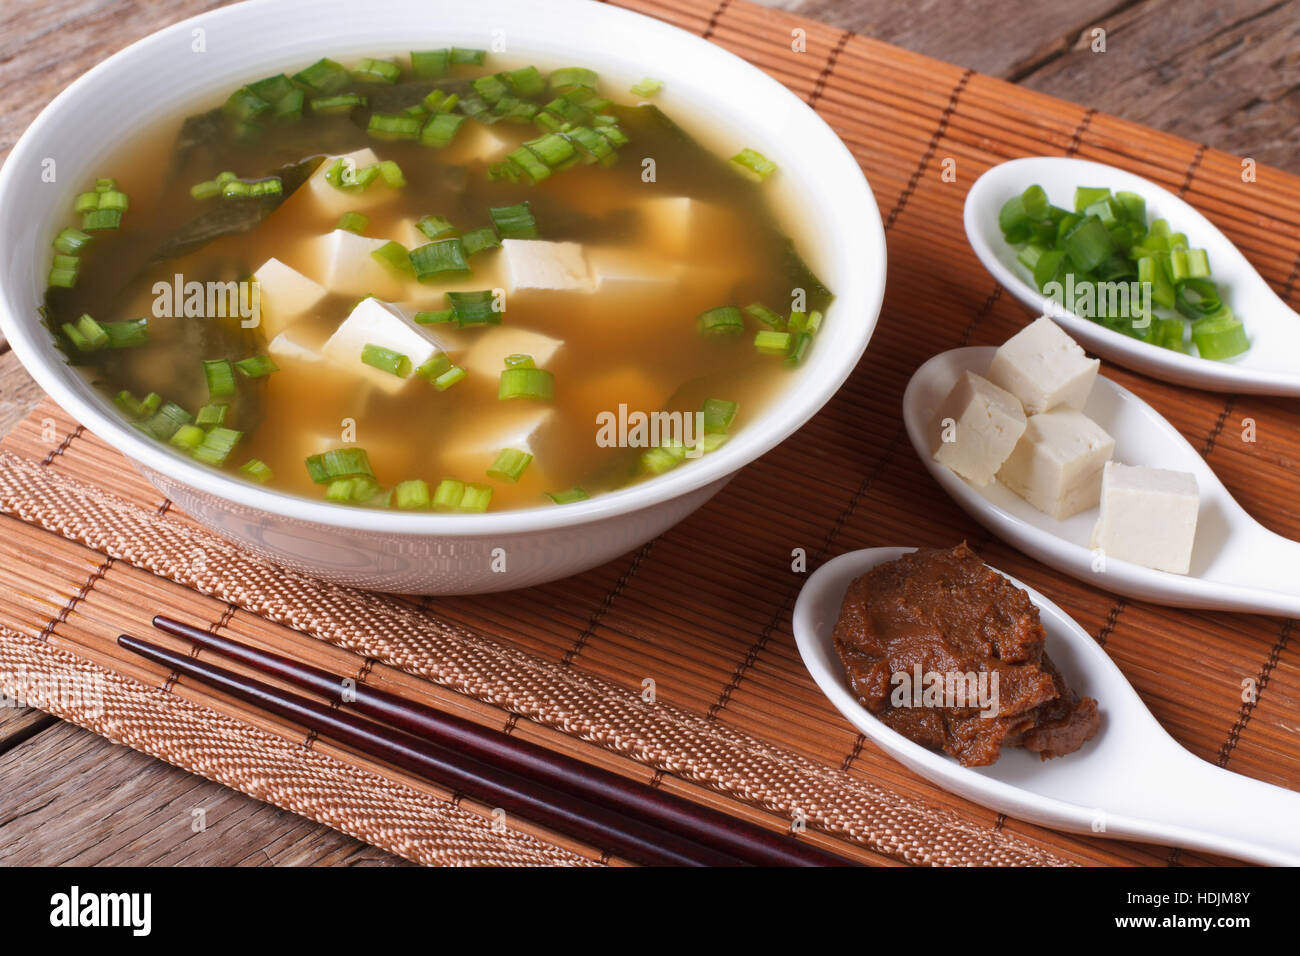 Japanese miso soup and ingredients on the table close-up. horizontal Stock Photo